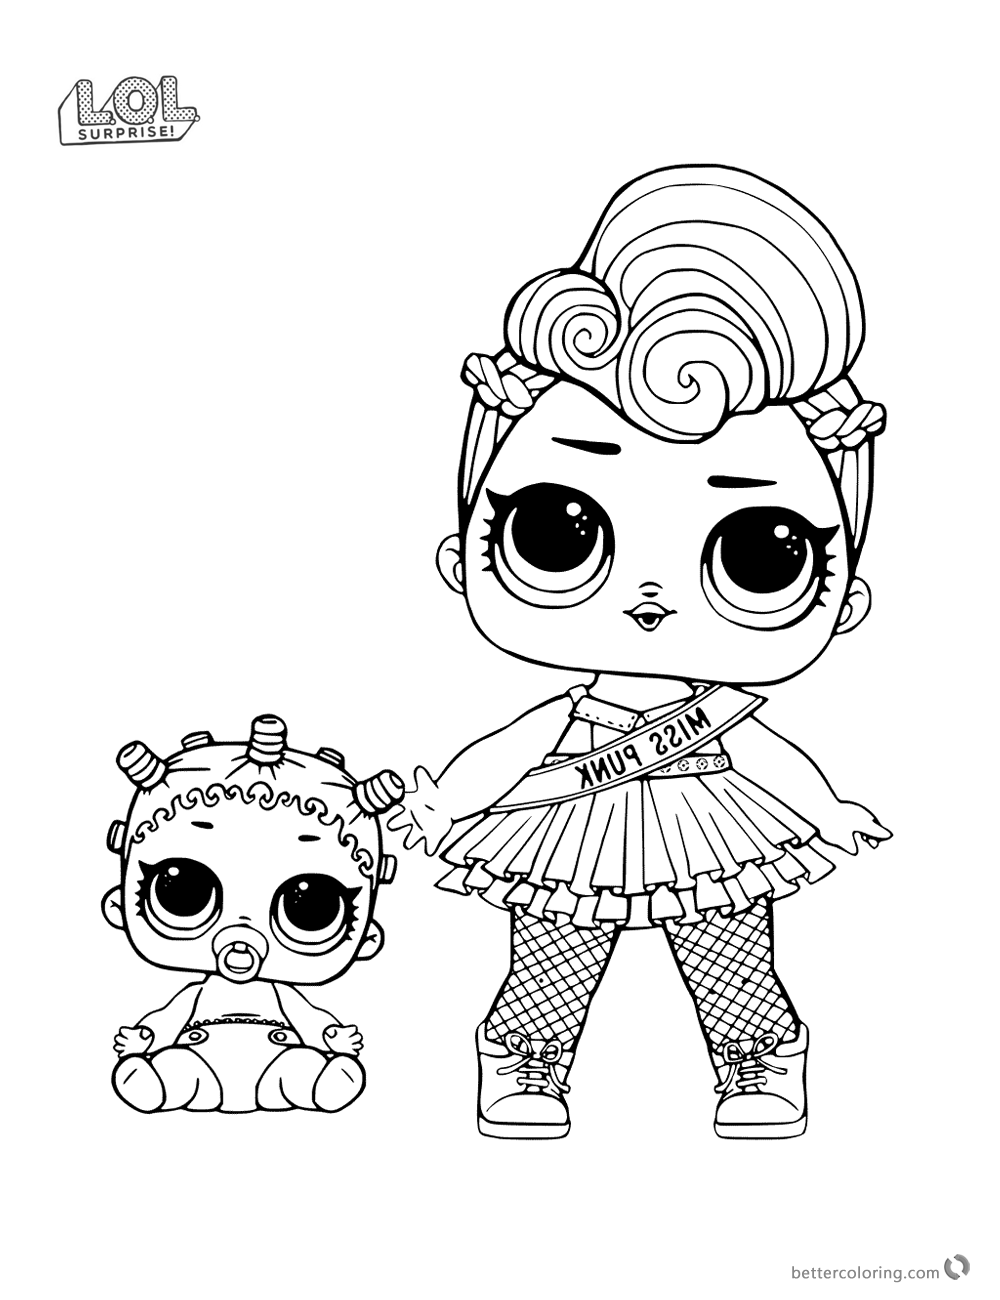 LOL Coloring Pages FREE Printable 27